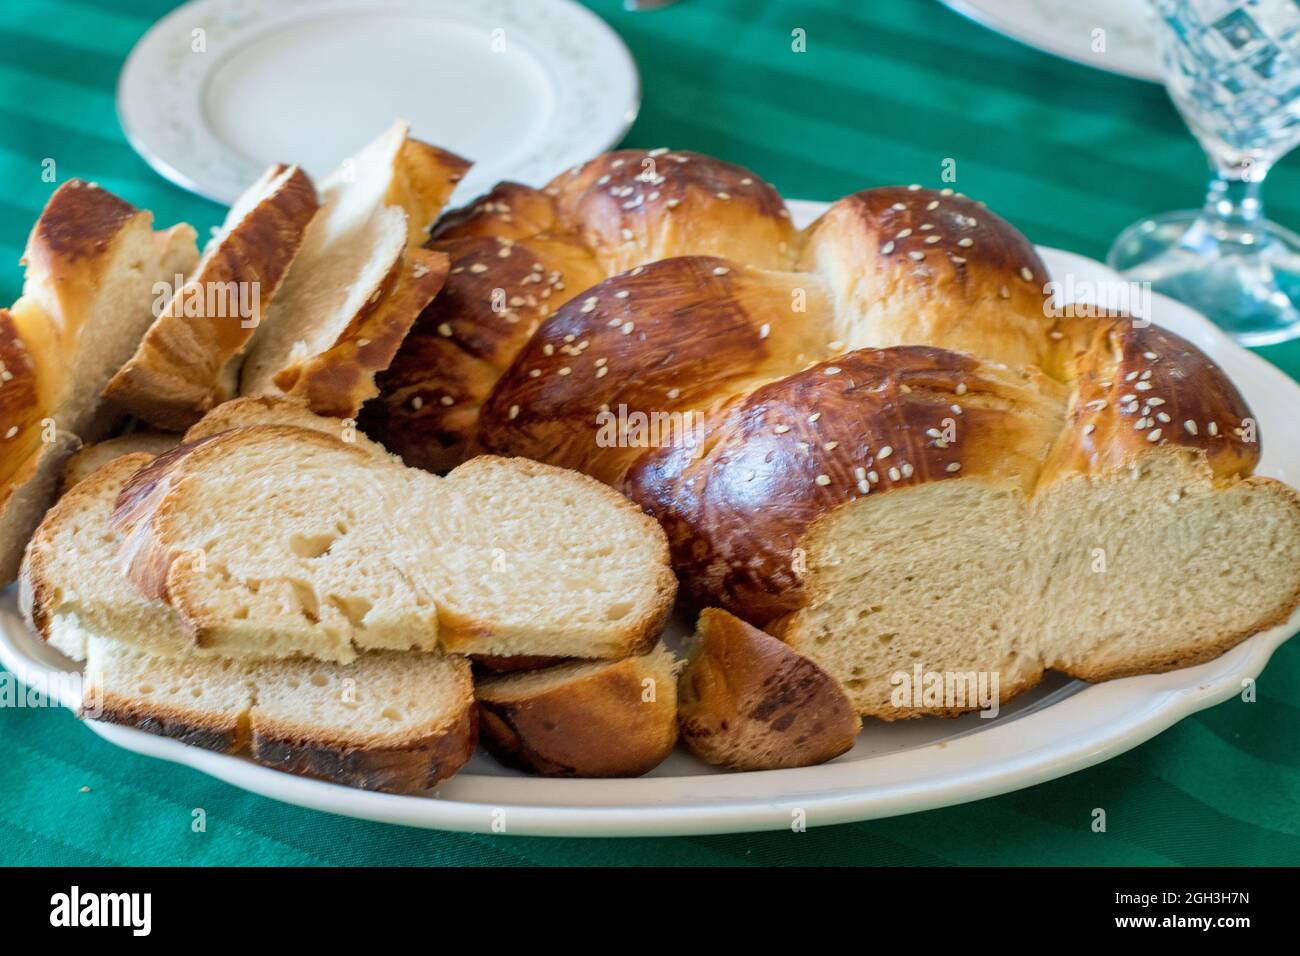 https://c8.alamy.com/comp/2GH3H7N/challah-a-kosher-braided-egg-y-bread-is-often-served-in-jewish-households-during-shabbat-and-important-holidays-2GH3H7N.jpg